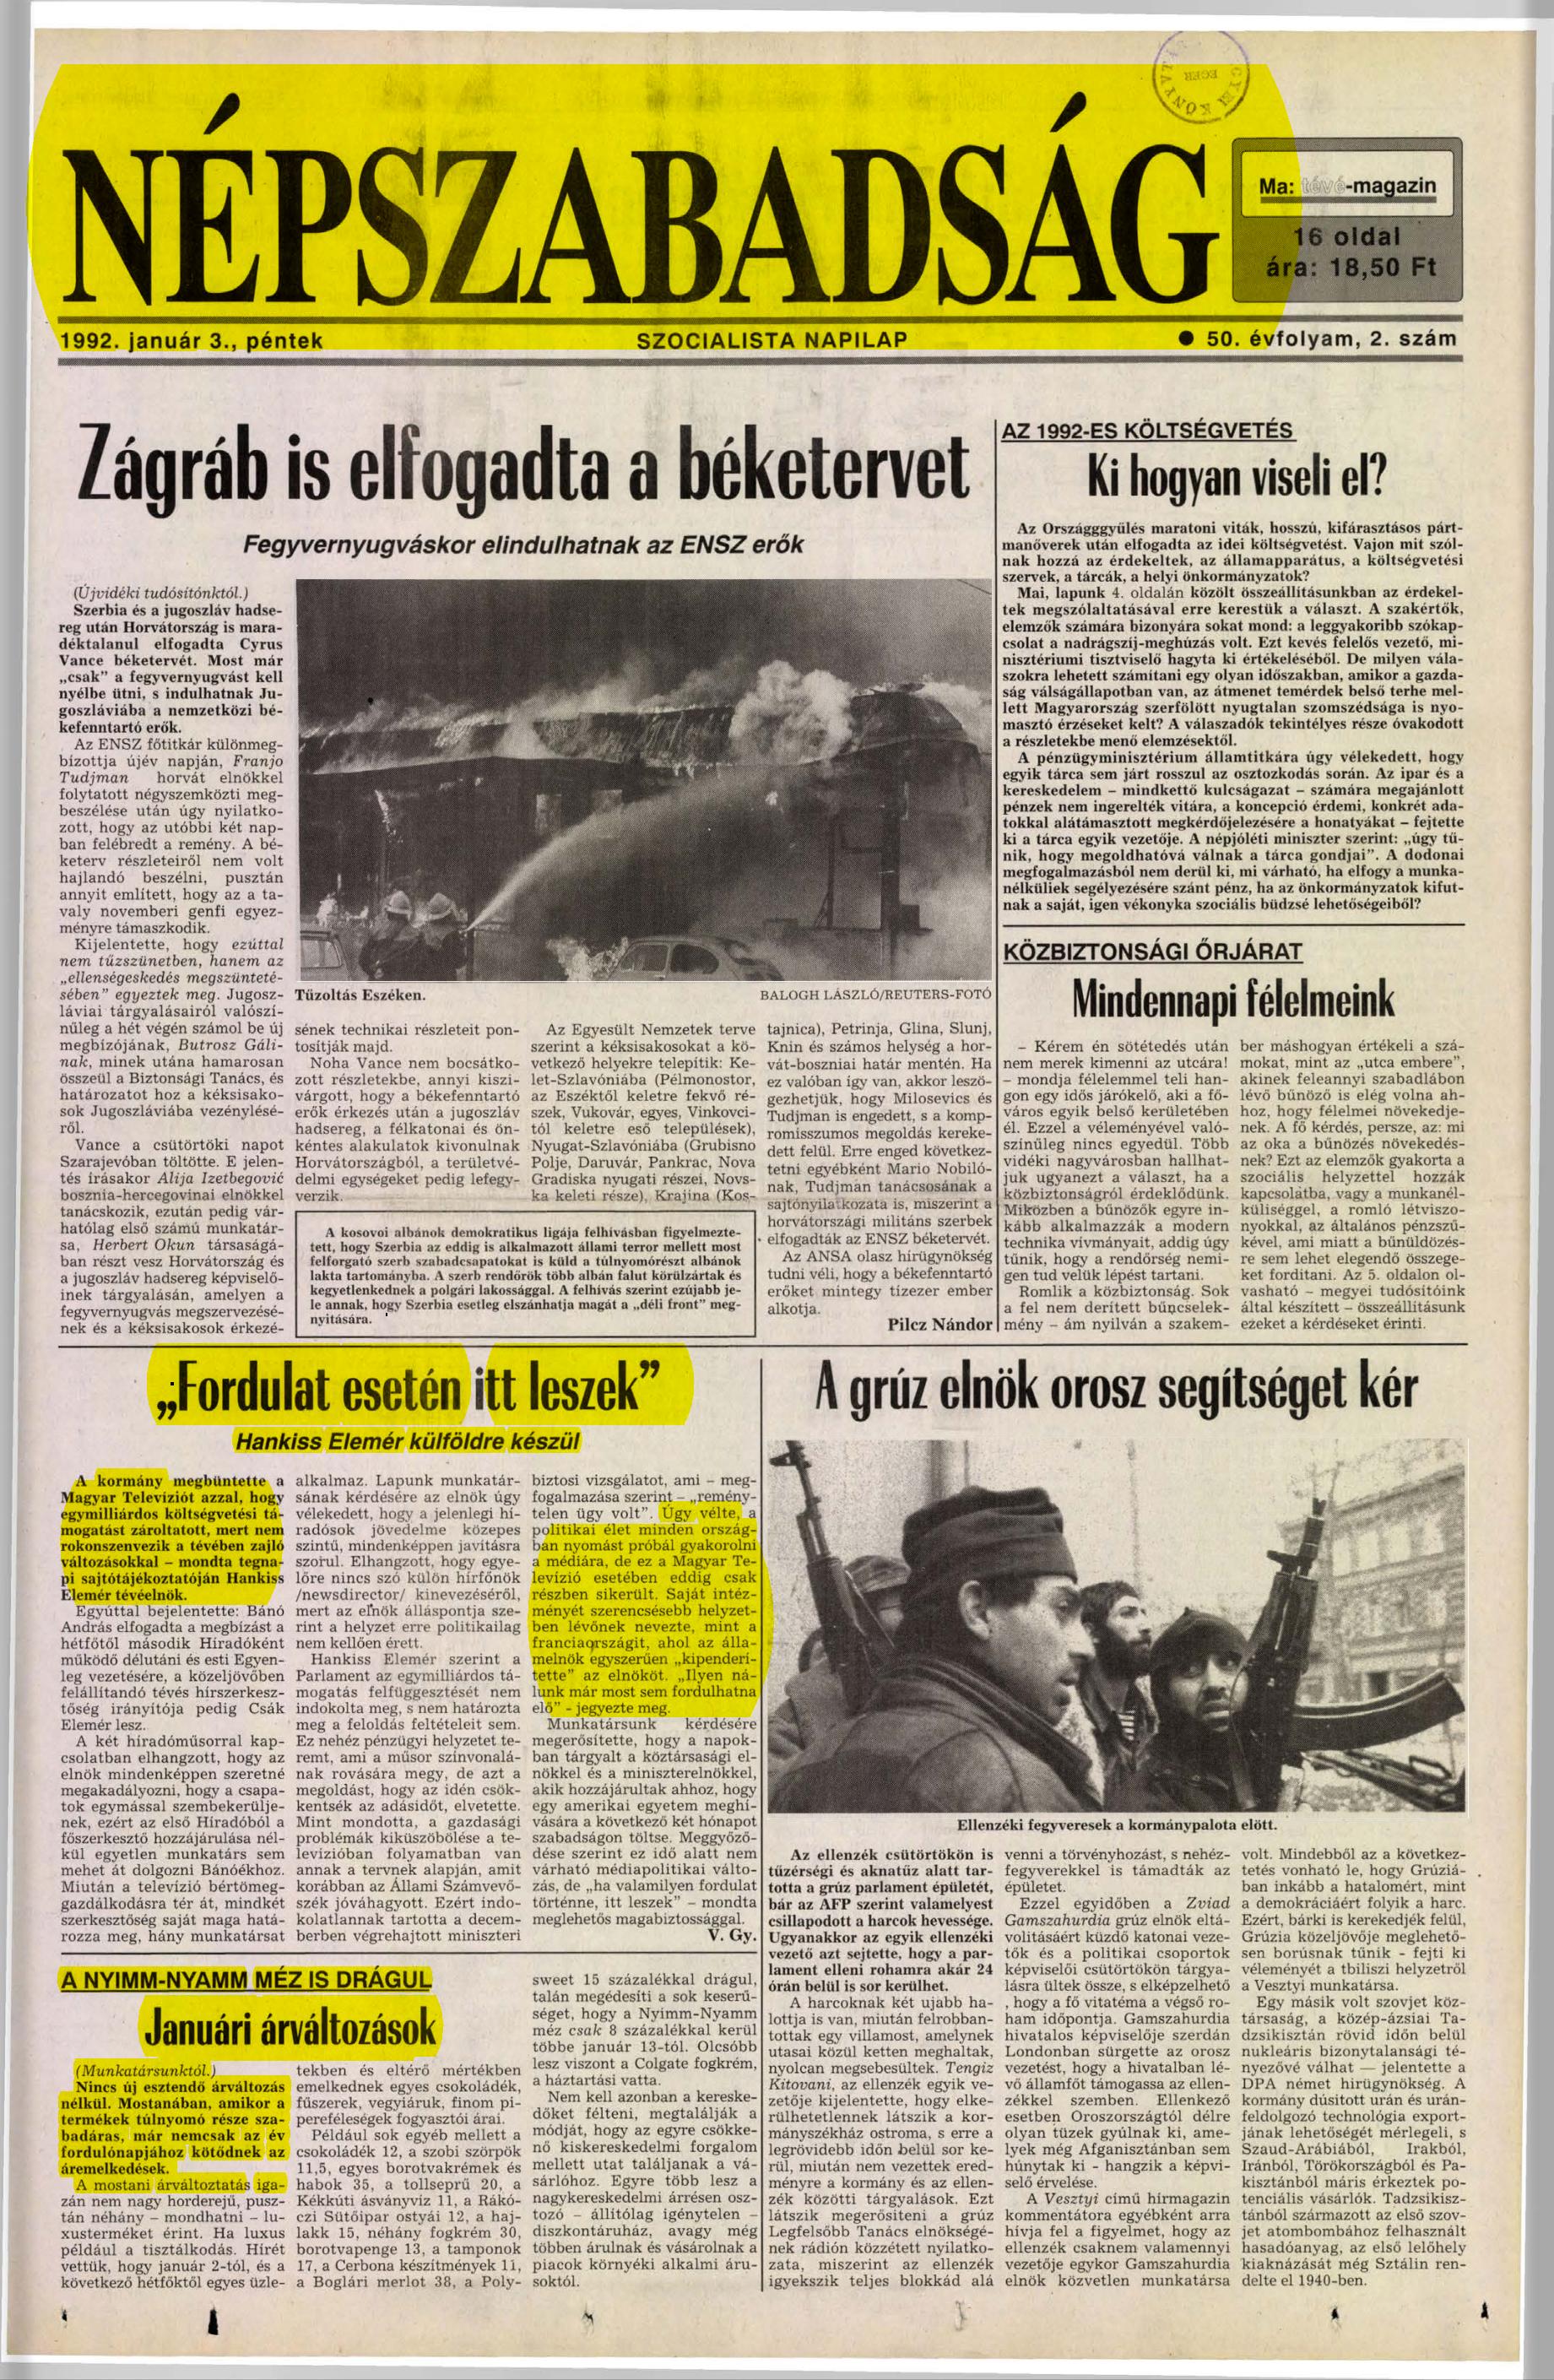 nepszabadsag_1992_01_pages24-24-page-001_1.jpg